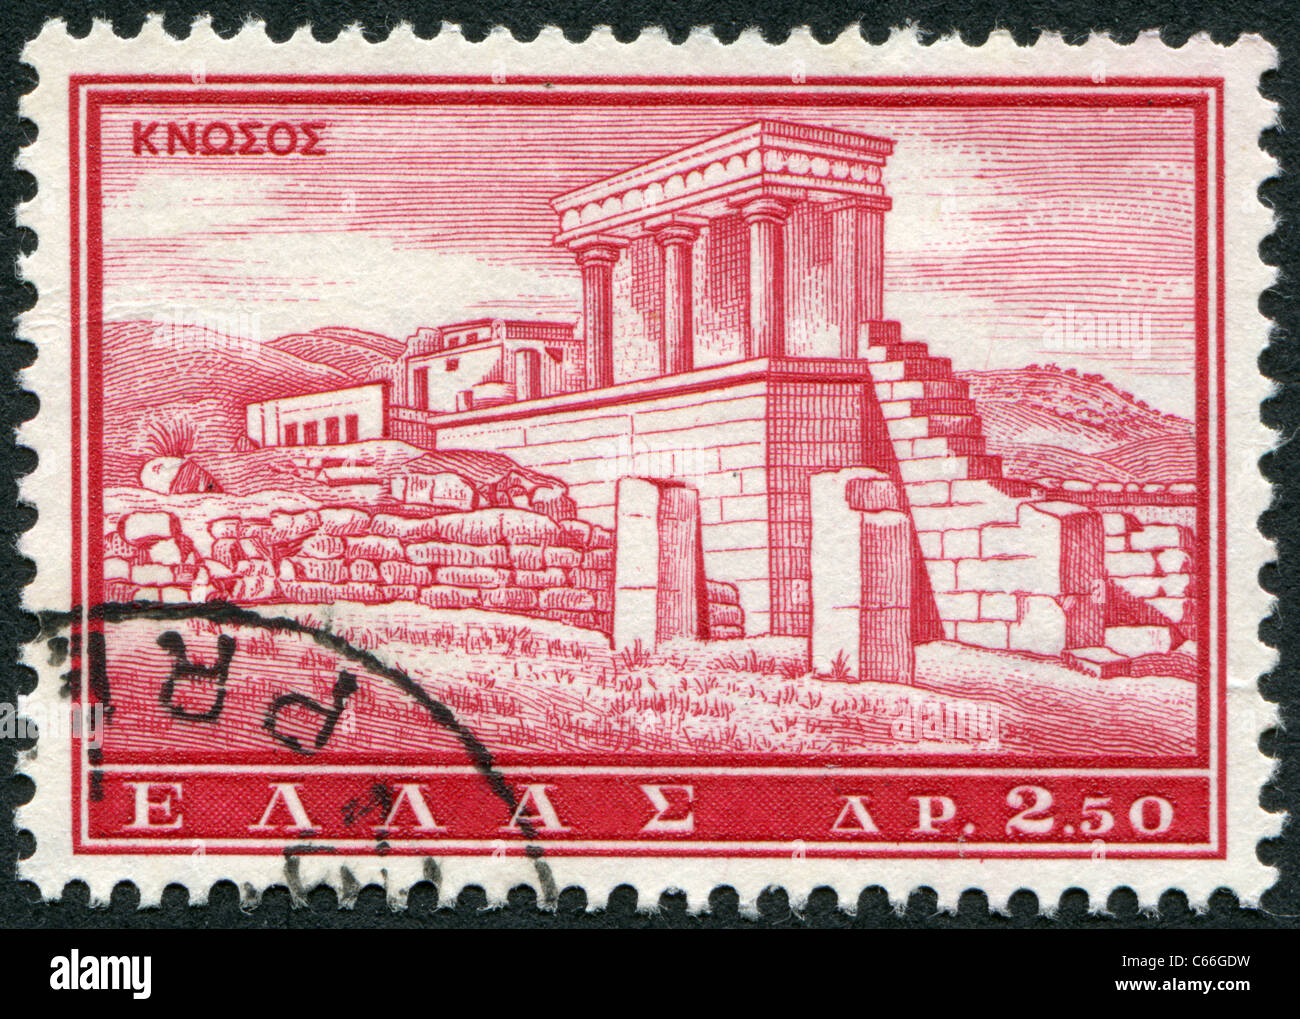 GREECE - 1961: A stamp printed in Greece, shows the ruins of Knossos Minoan Palace Stock Photo